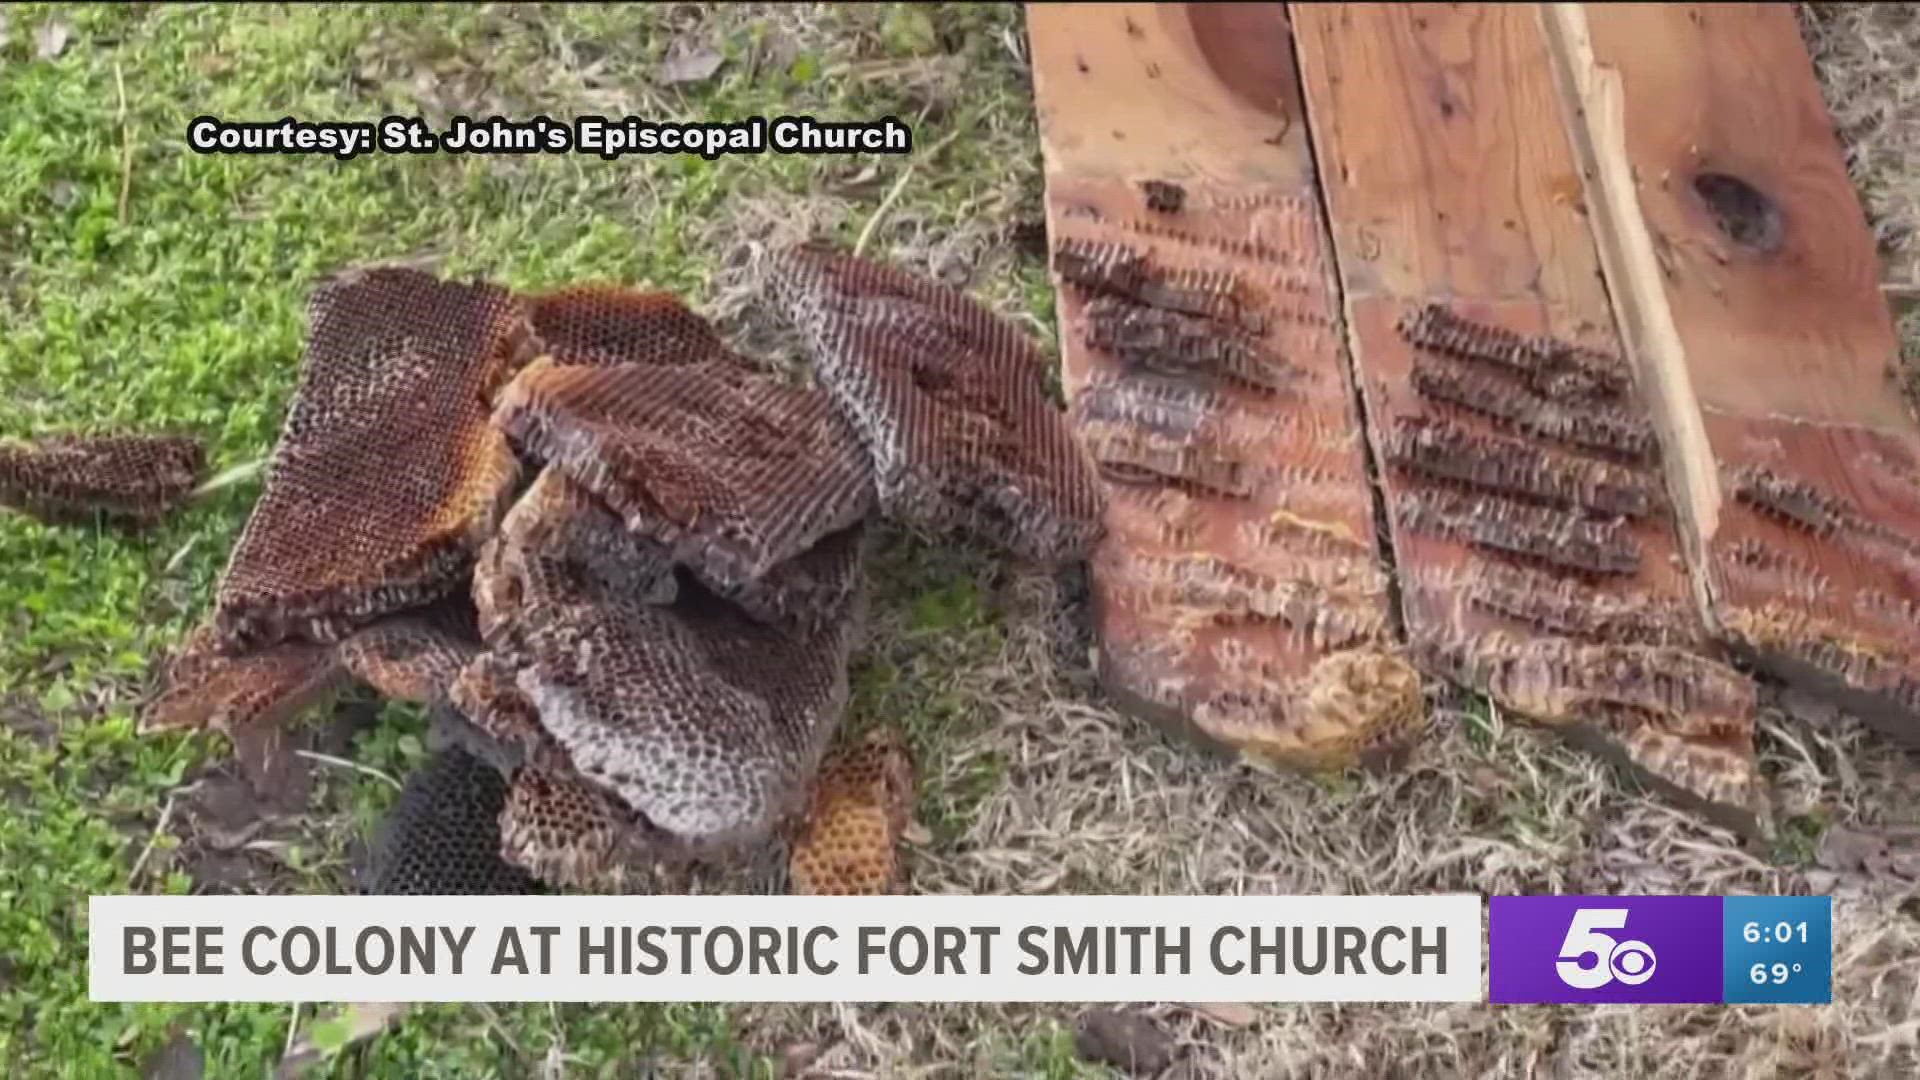 The bees had already left their hive on the roof of St. John's Episcopal Church, but beekeepers removed the hive left behind.